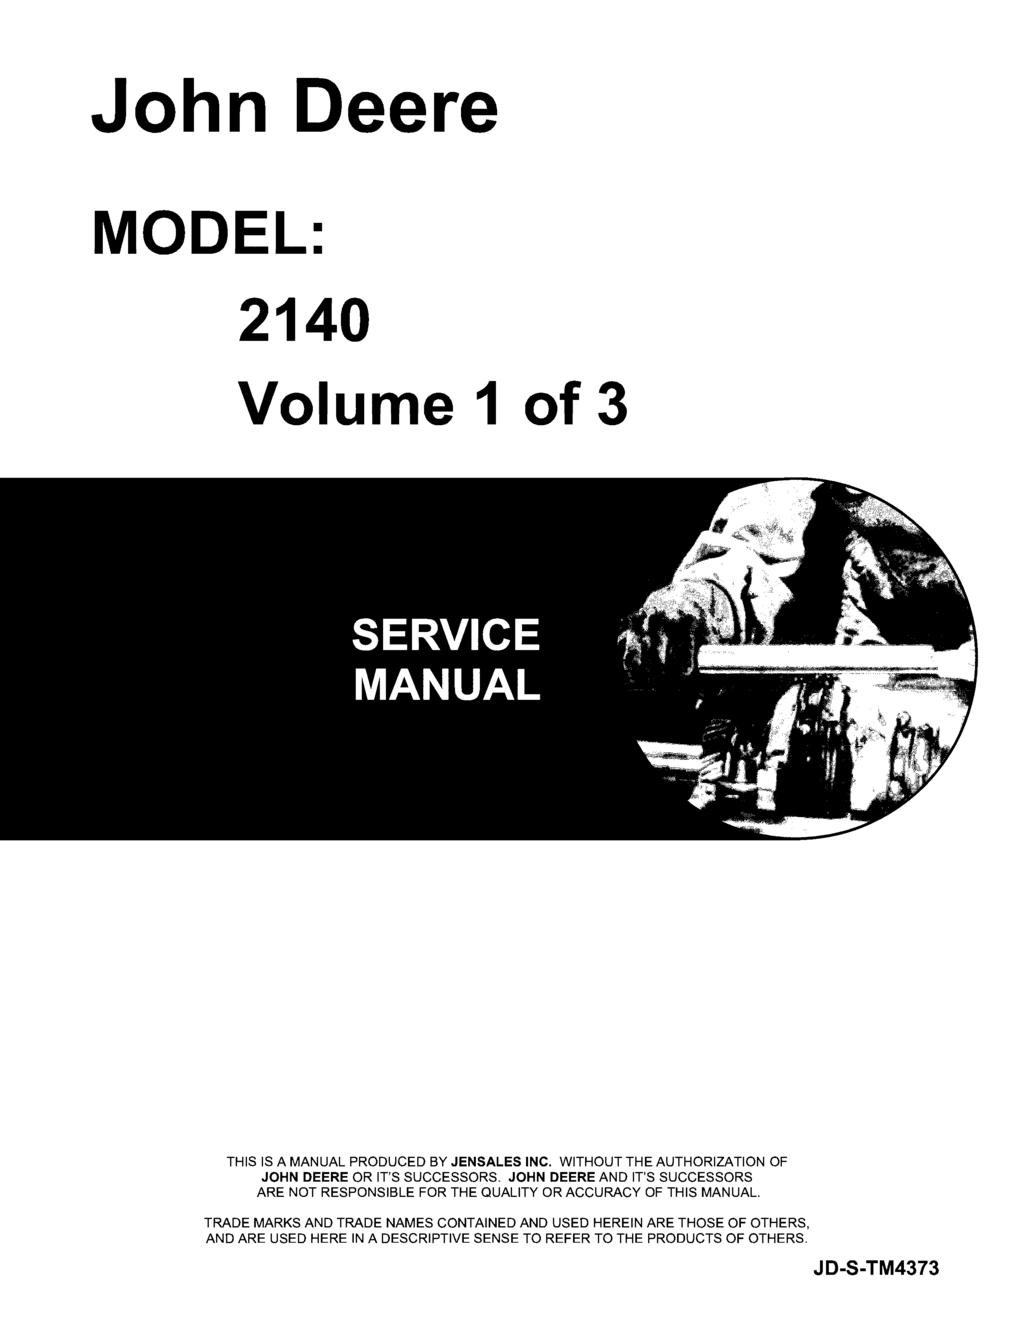 John Deere MODEL: 2140 Volume 1 of 3 THIS IS A MANUAL PRODUCED BY JENSALES INC. WITHOUT THE AUTHORIZATION OF JOHN DEERE OR IT'S SUCCESSORS.